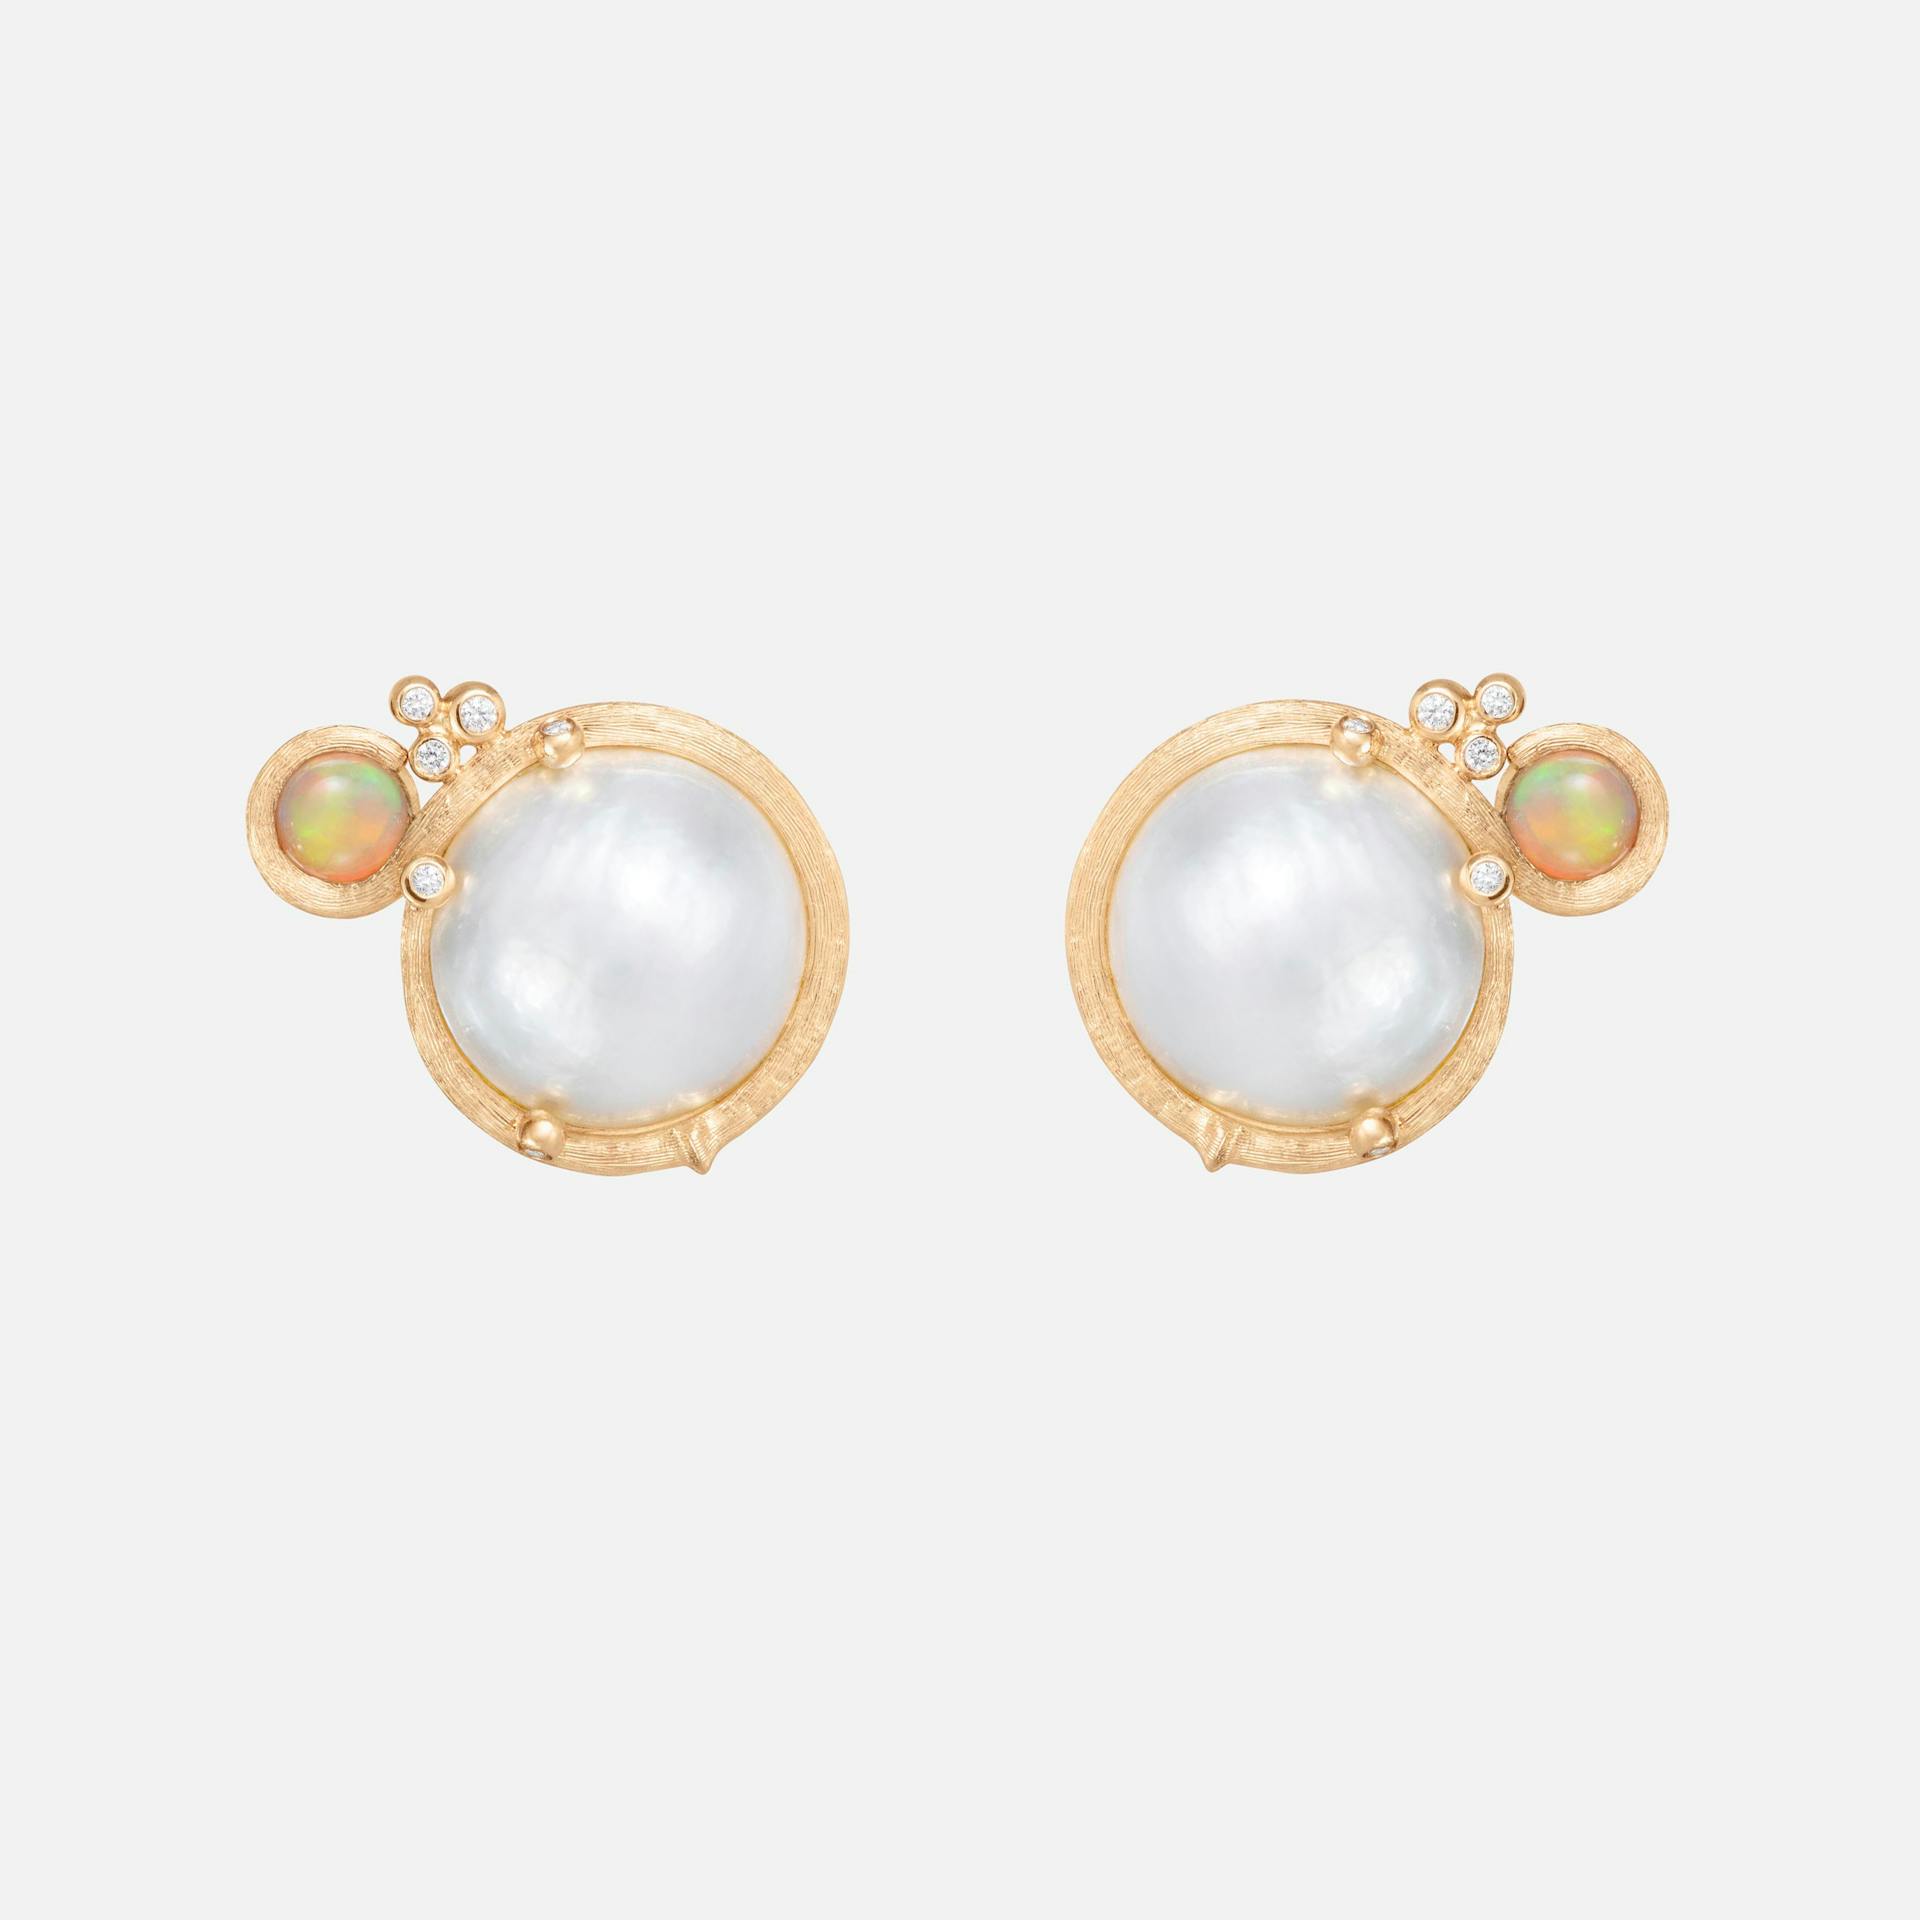 BoHo earclips small 18k gold with Mabe pearls, opal and diamonds